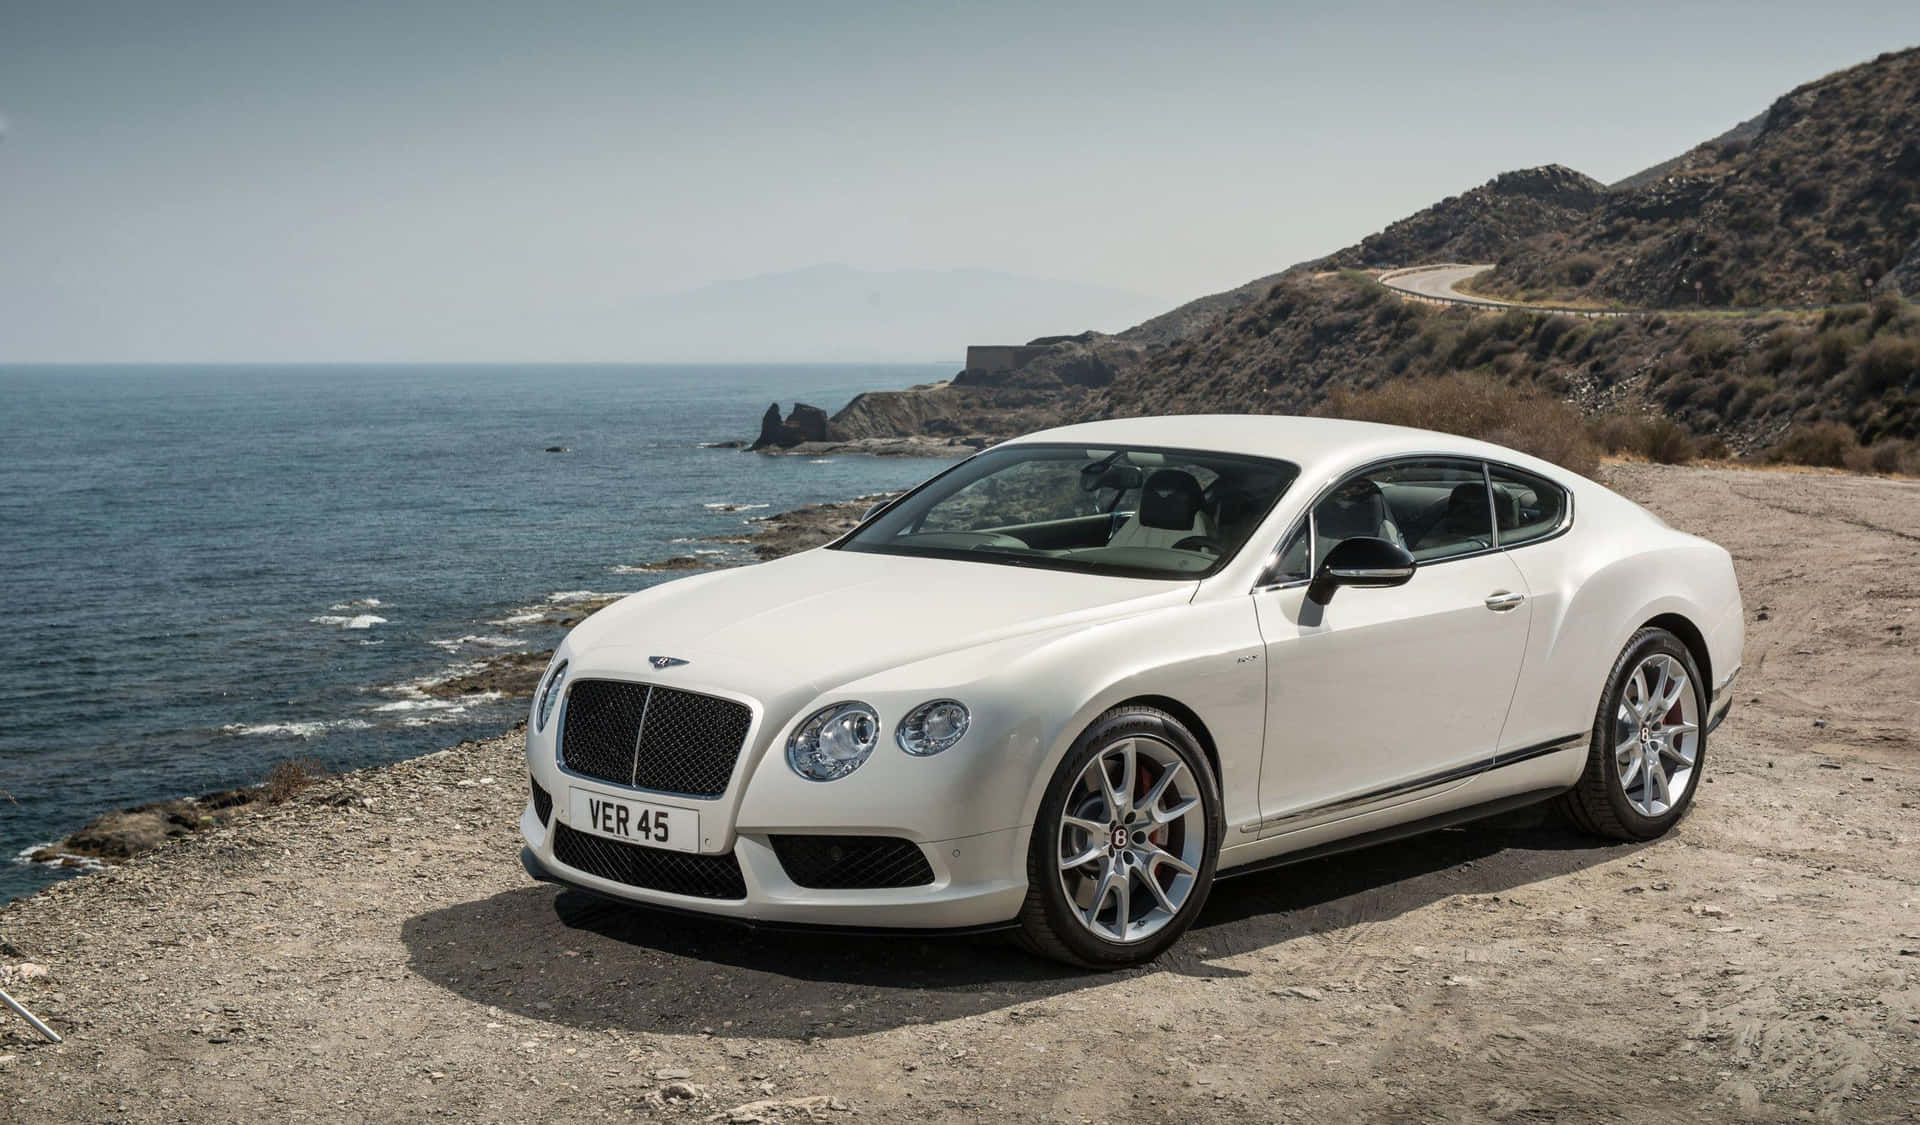 Bentley Continental Gt - Gt - Gt - Gt - Gt - Gt - Gt - Bentley Continental Gt.